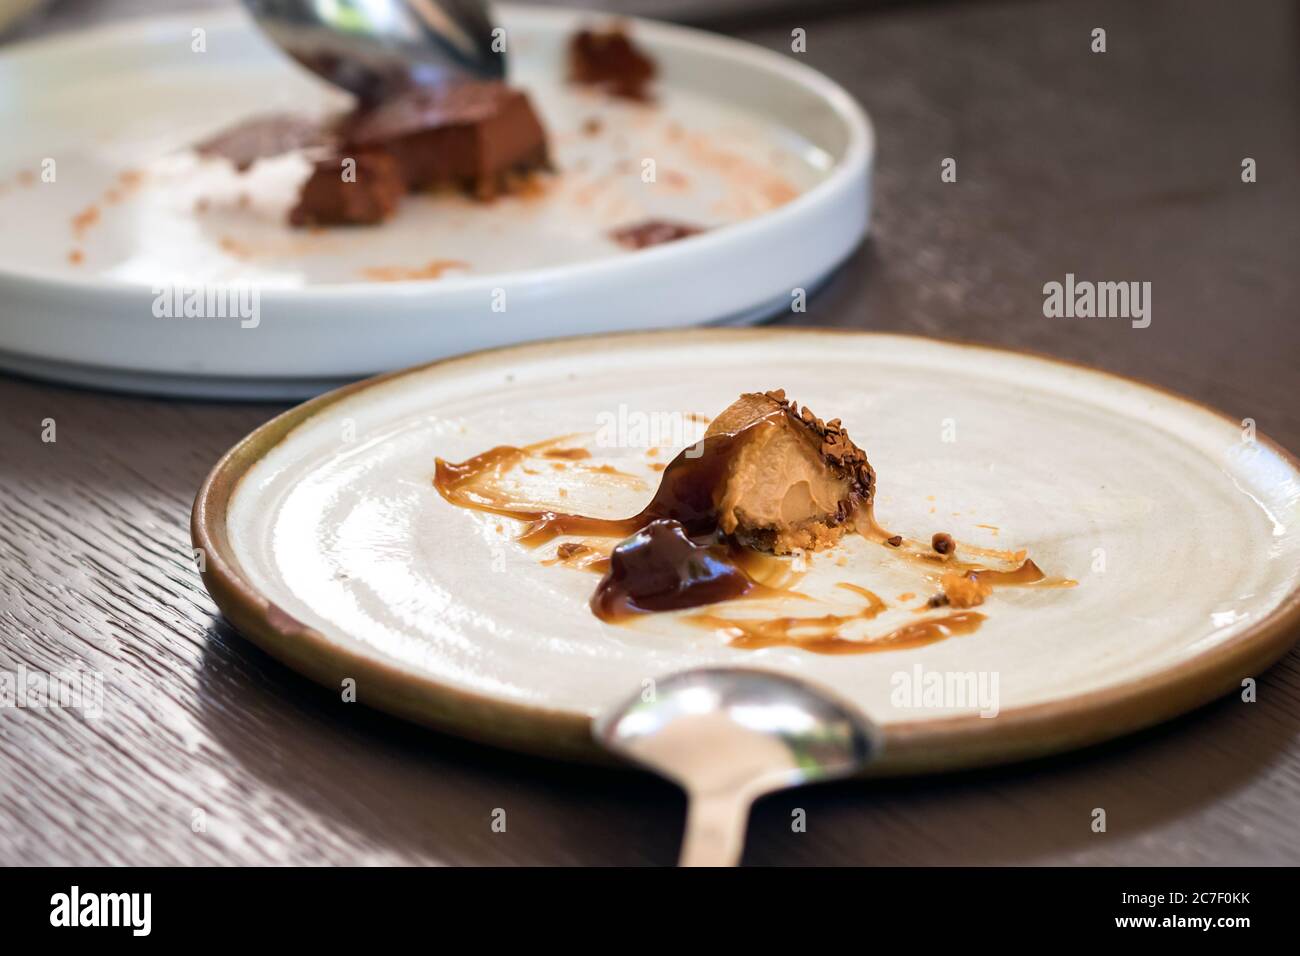 A plate with a gourment dessert leftover on a table Stock Photo